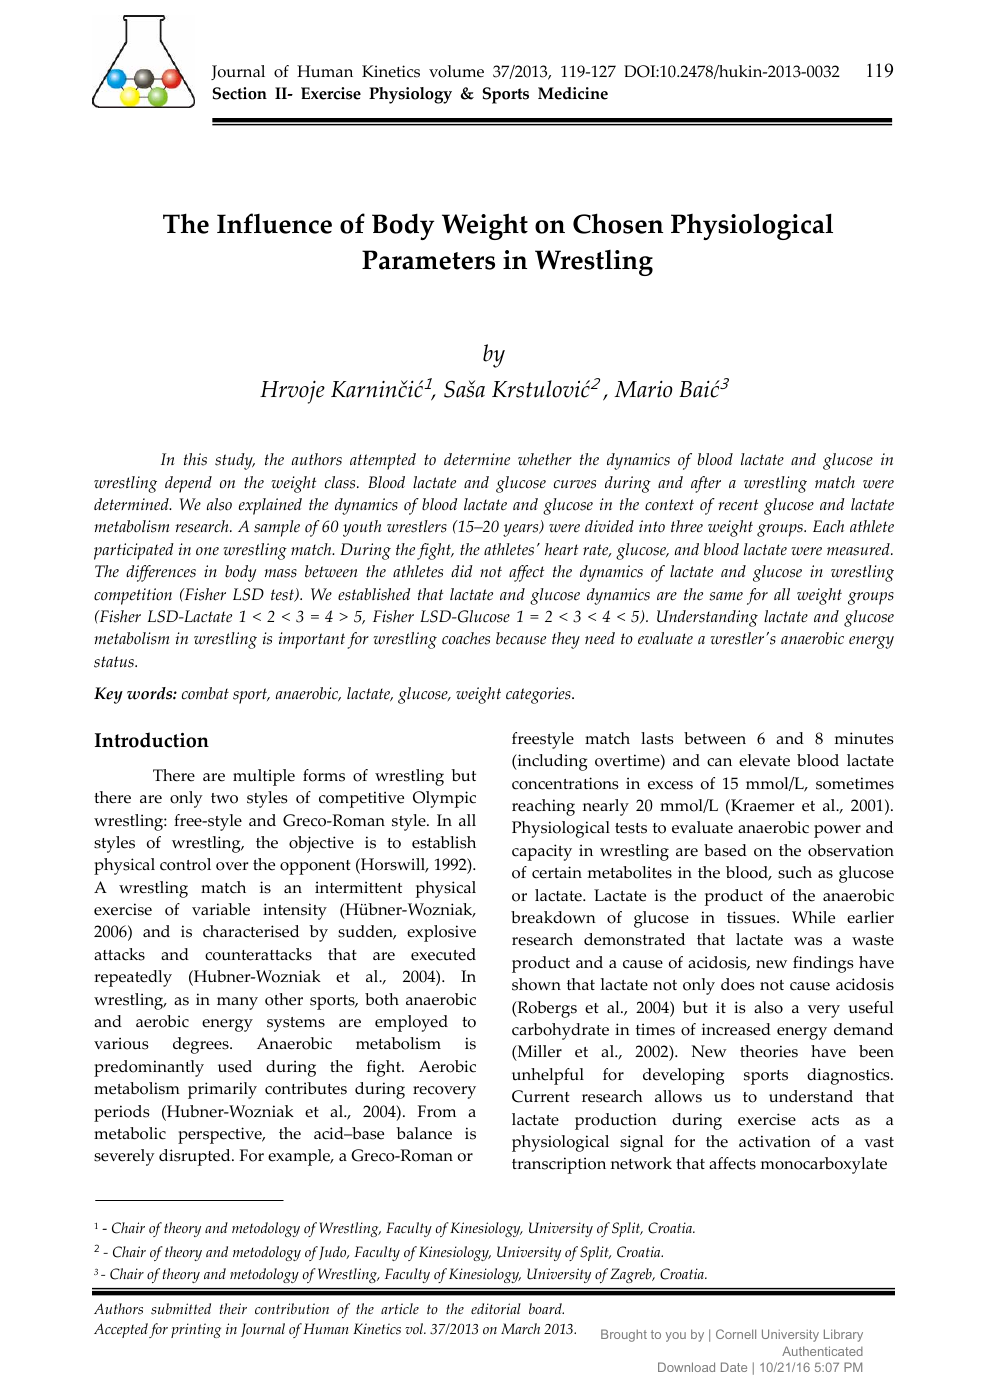 The Influence of Body Weight on Chosen Physiological Parameters in Wrestling  hq image